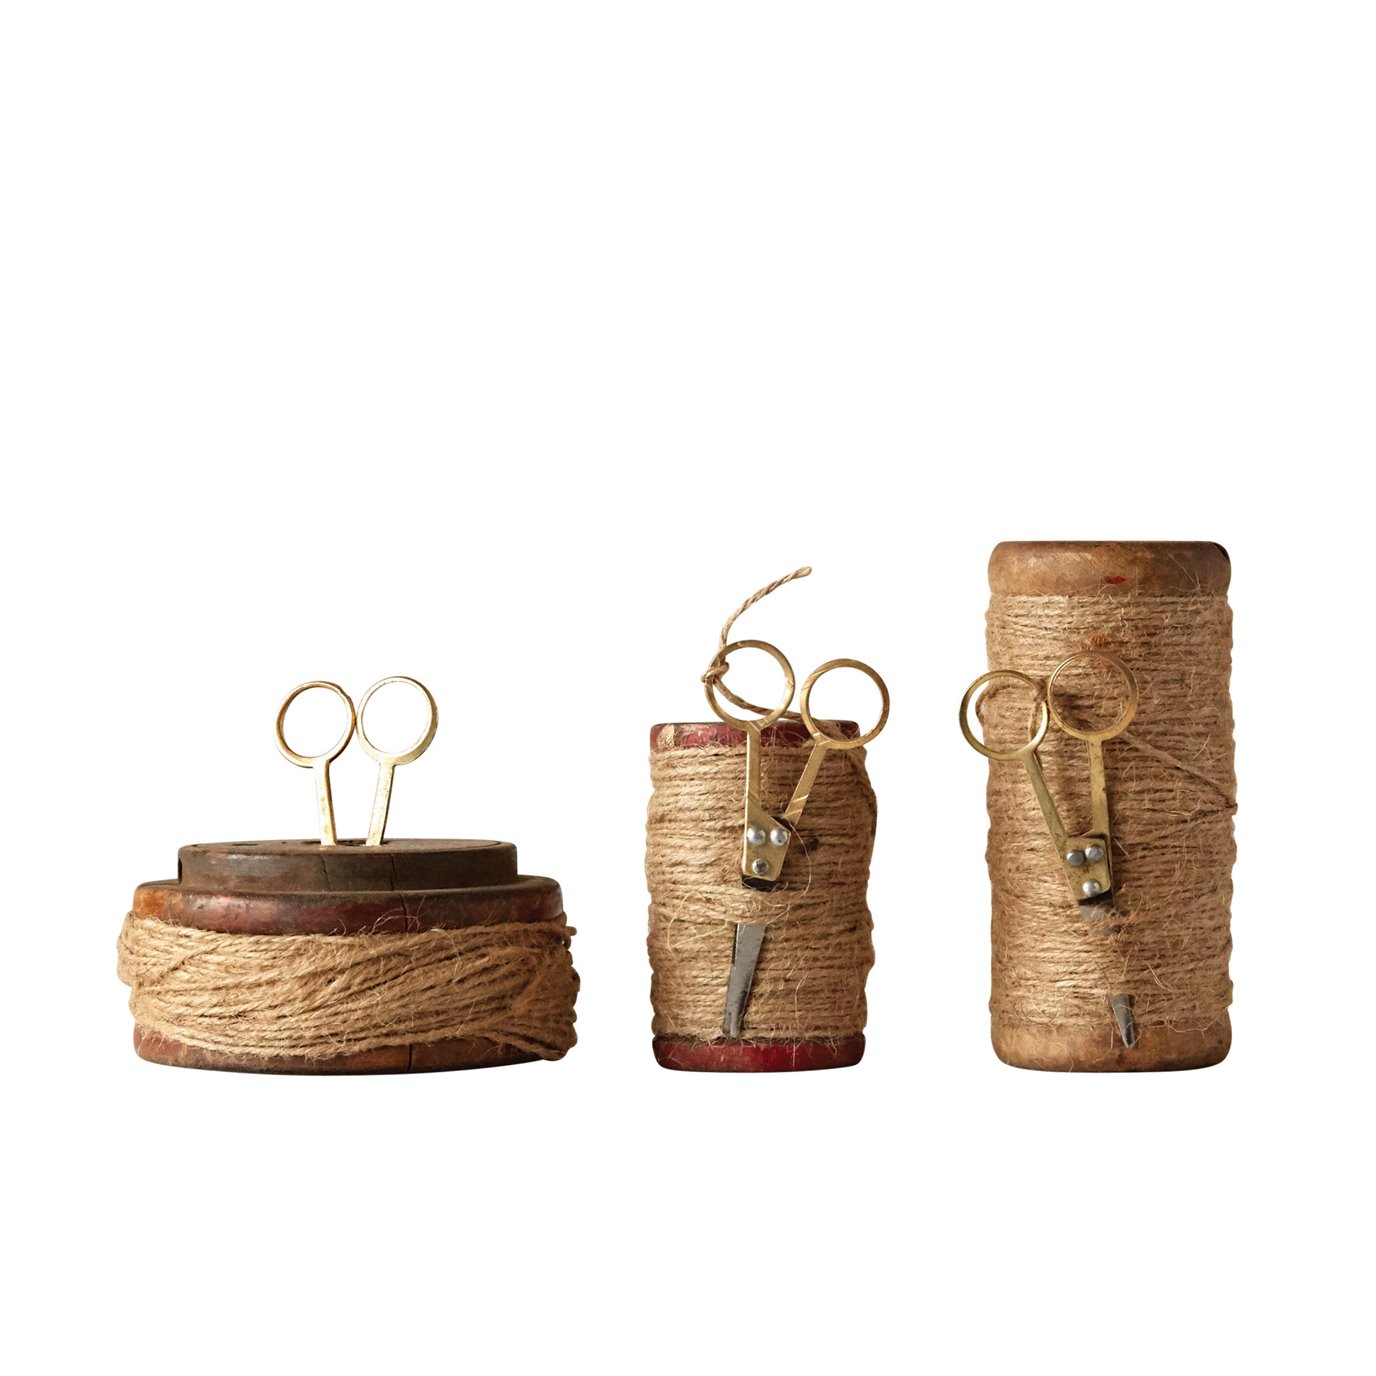 Found Decorative Wooden Spools with Jute & Scissors (Set of 3 Styles)